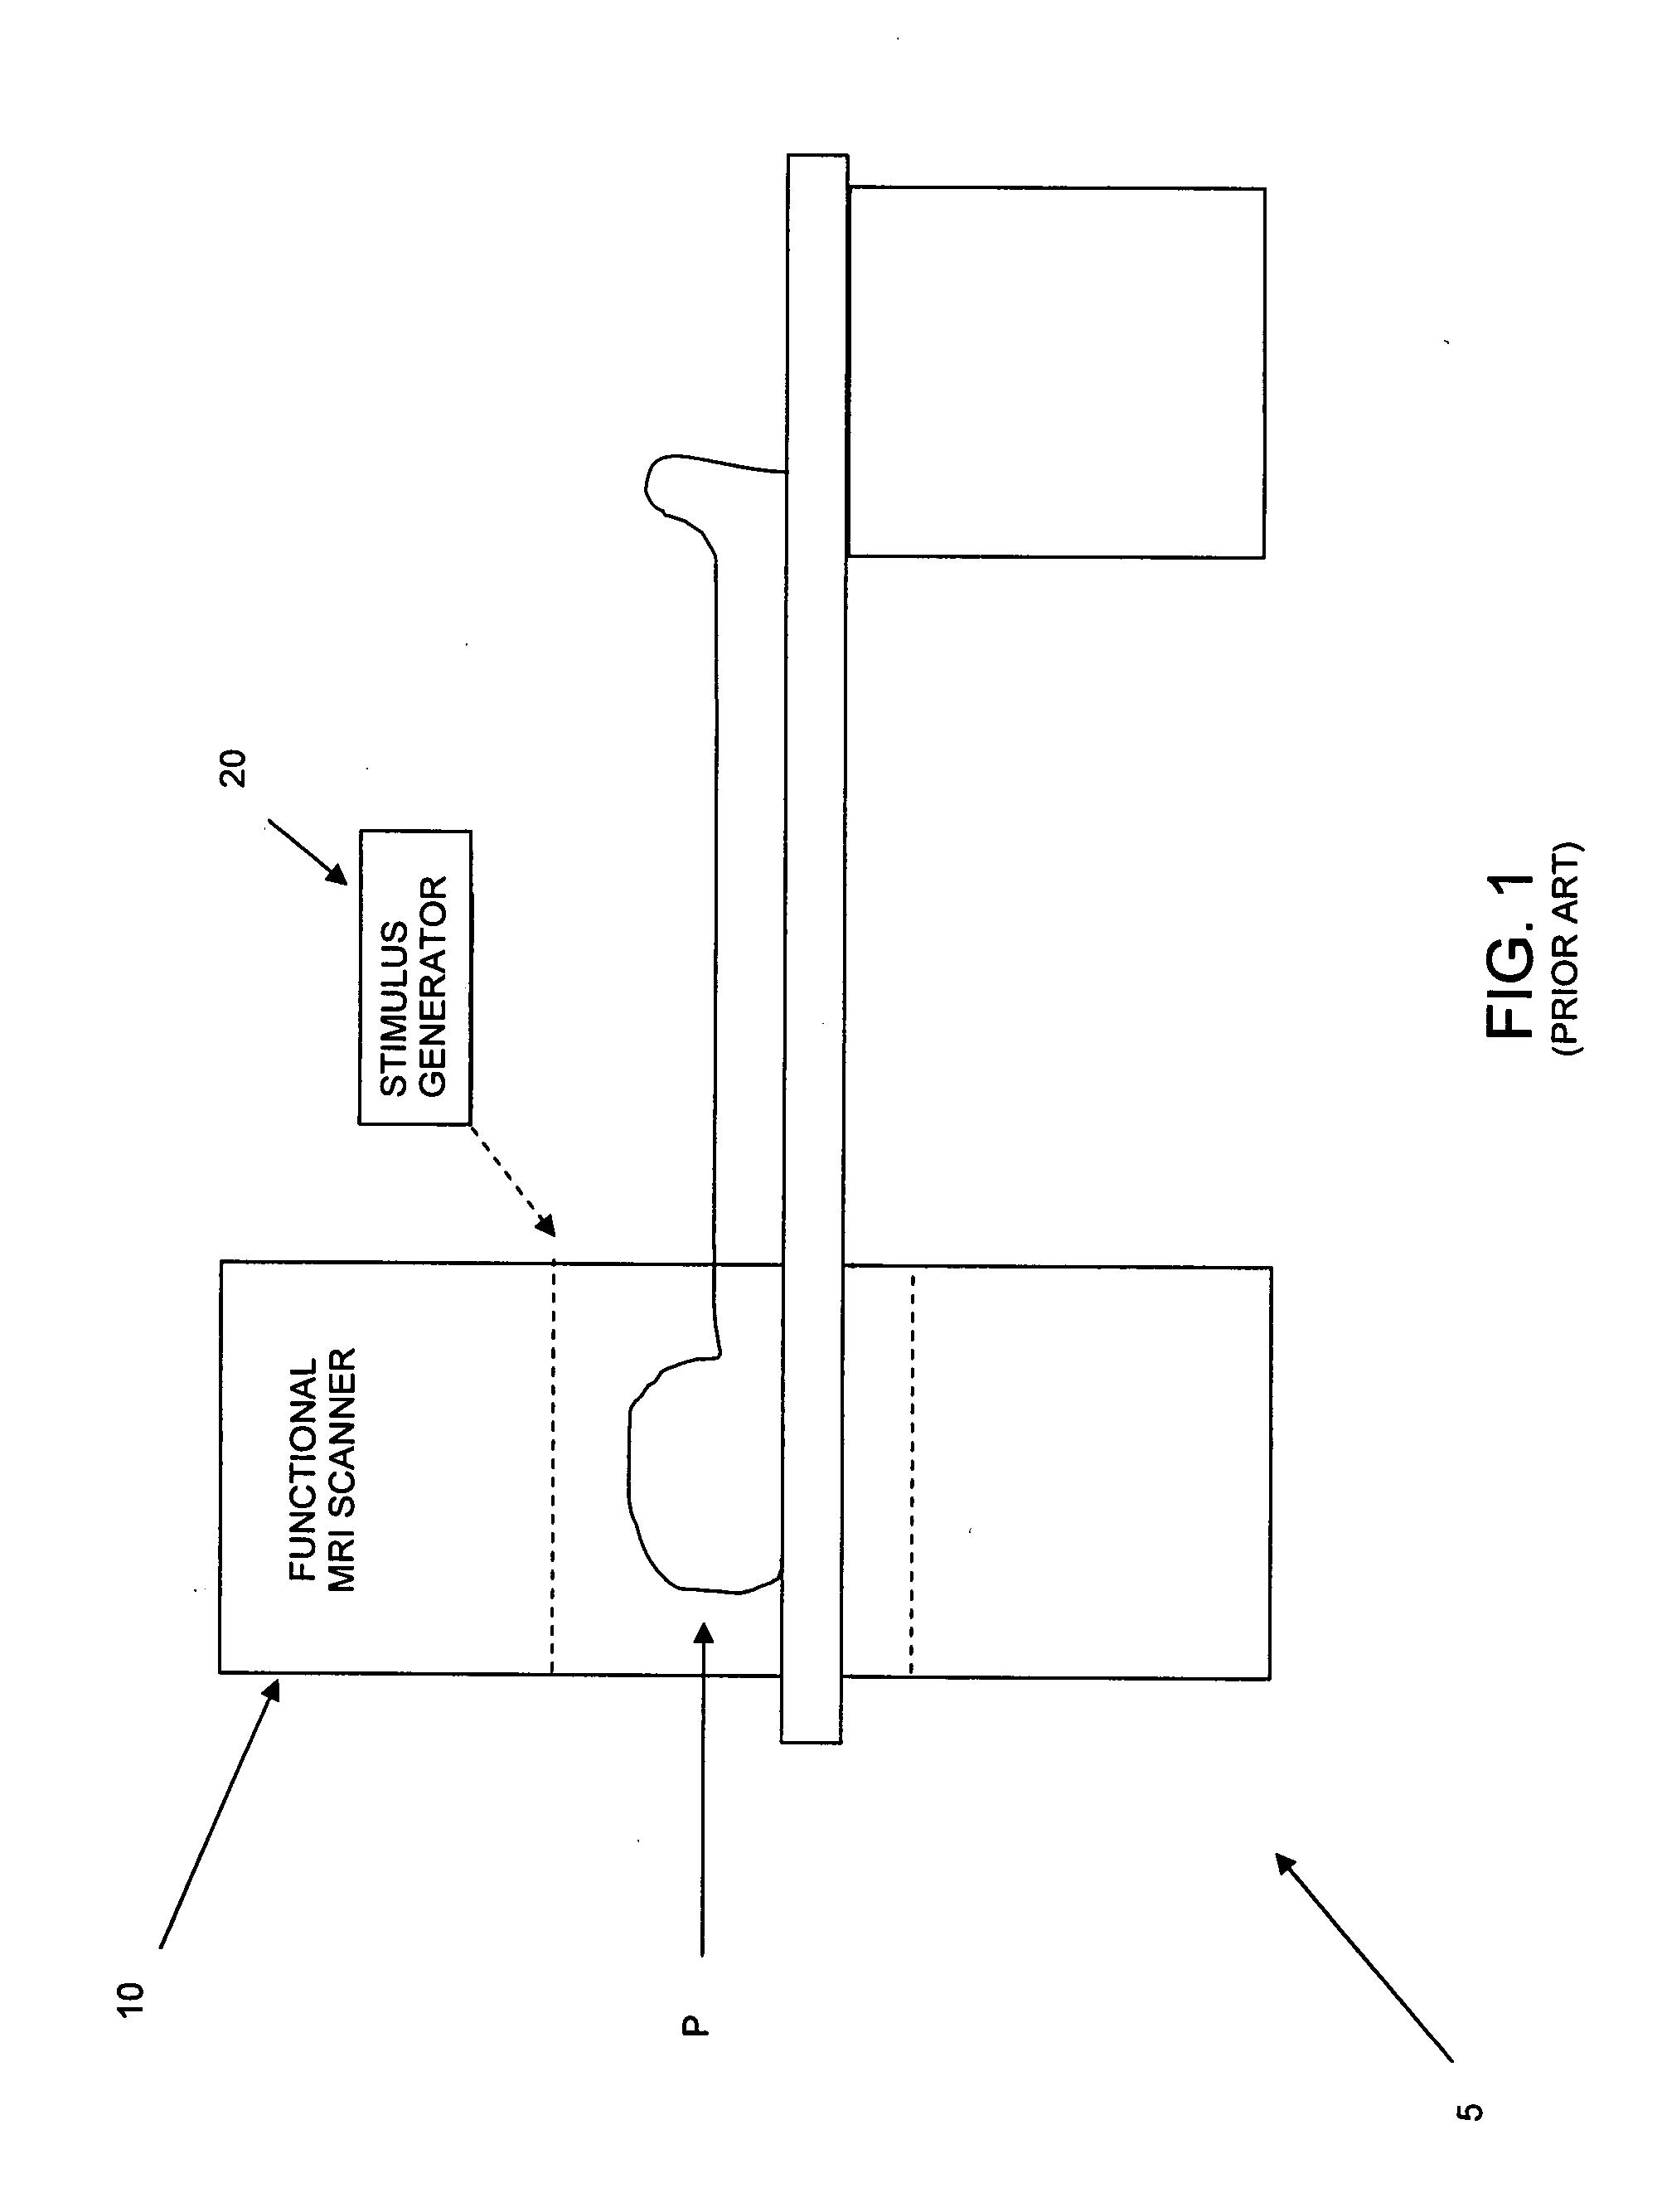 Method and apparatus for dynamically correlating neurological and cardiovascular parameters and for diagnosing and treating patients using the same